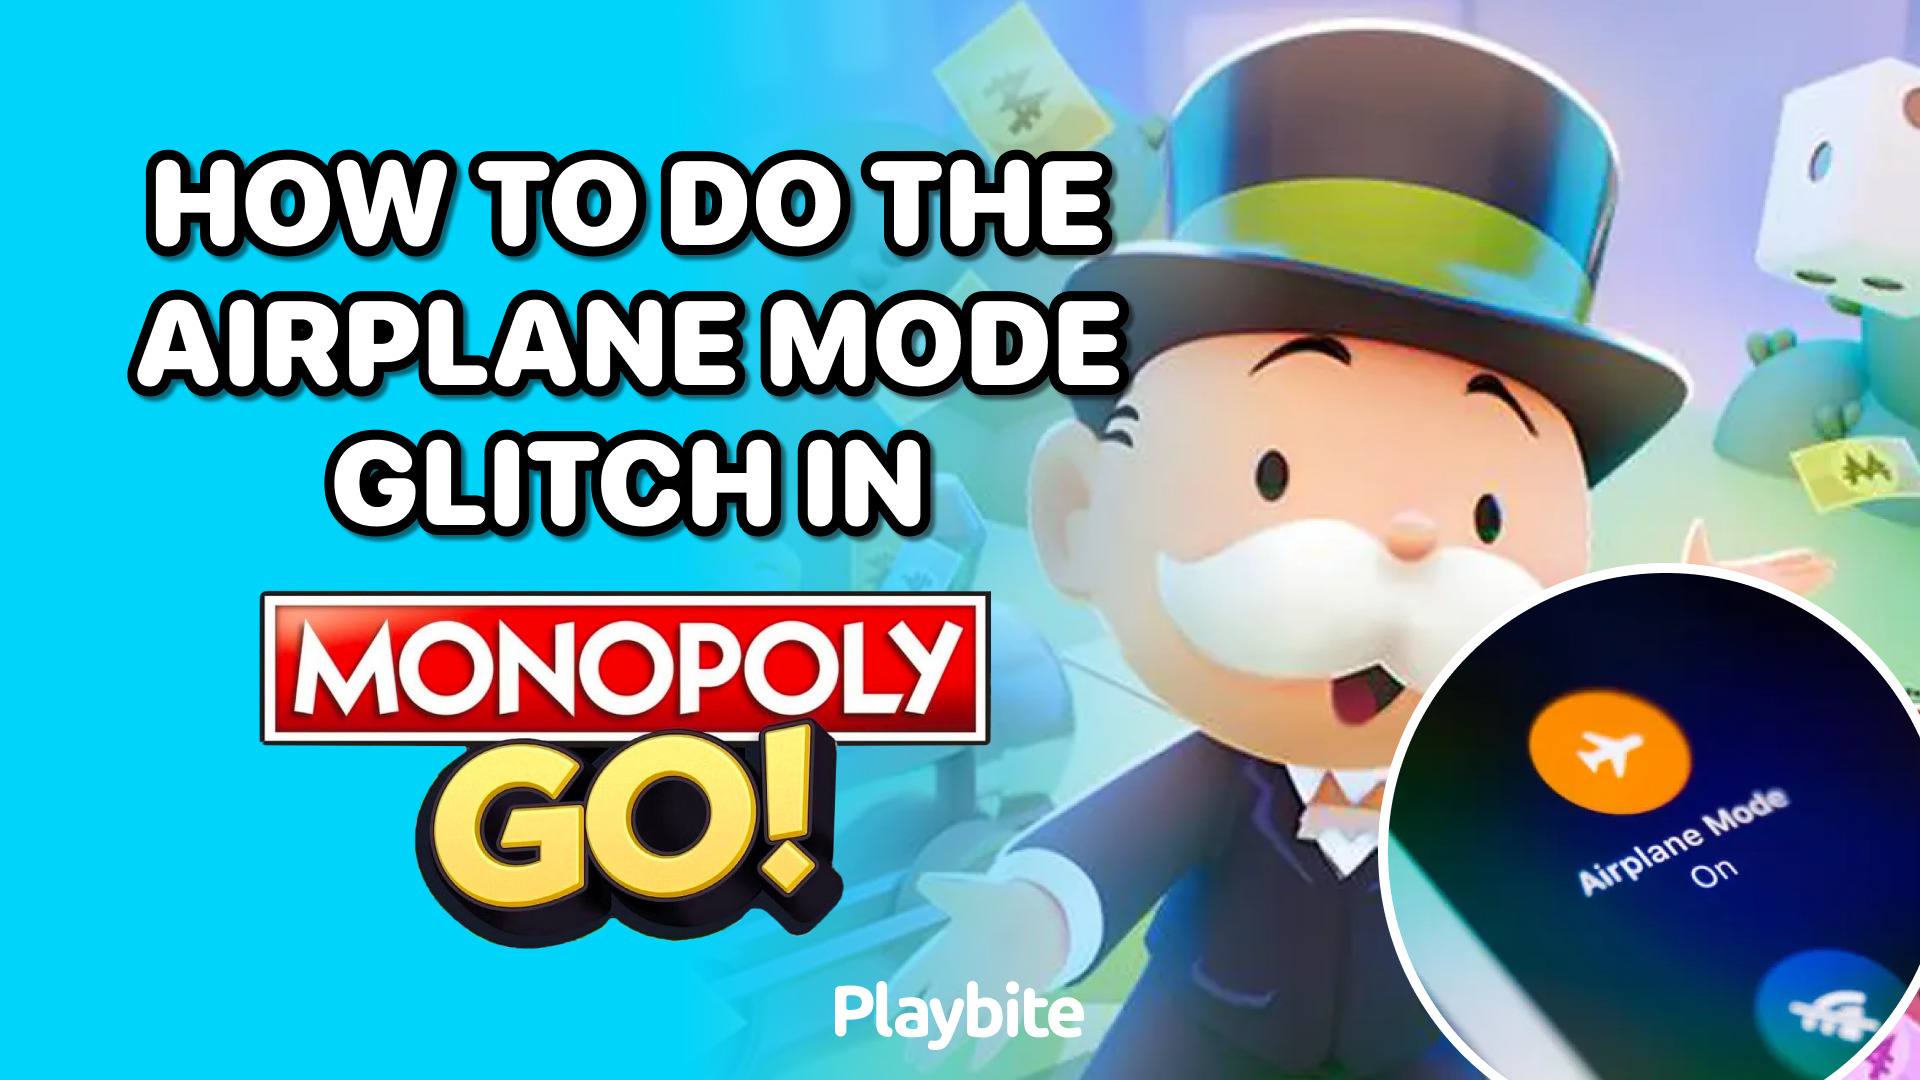 How to Do the Airplane Mode Glitch in Monopoly Go